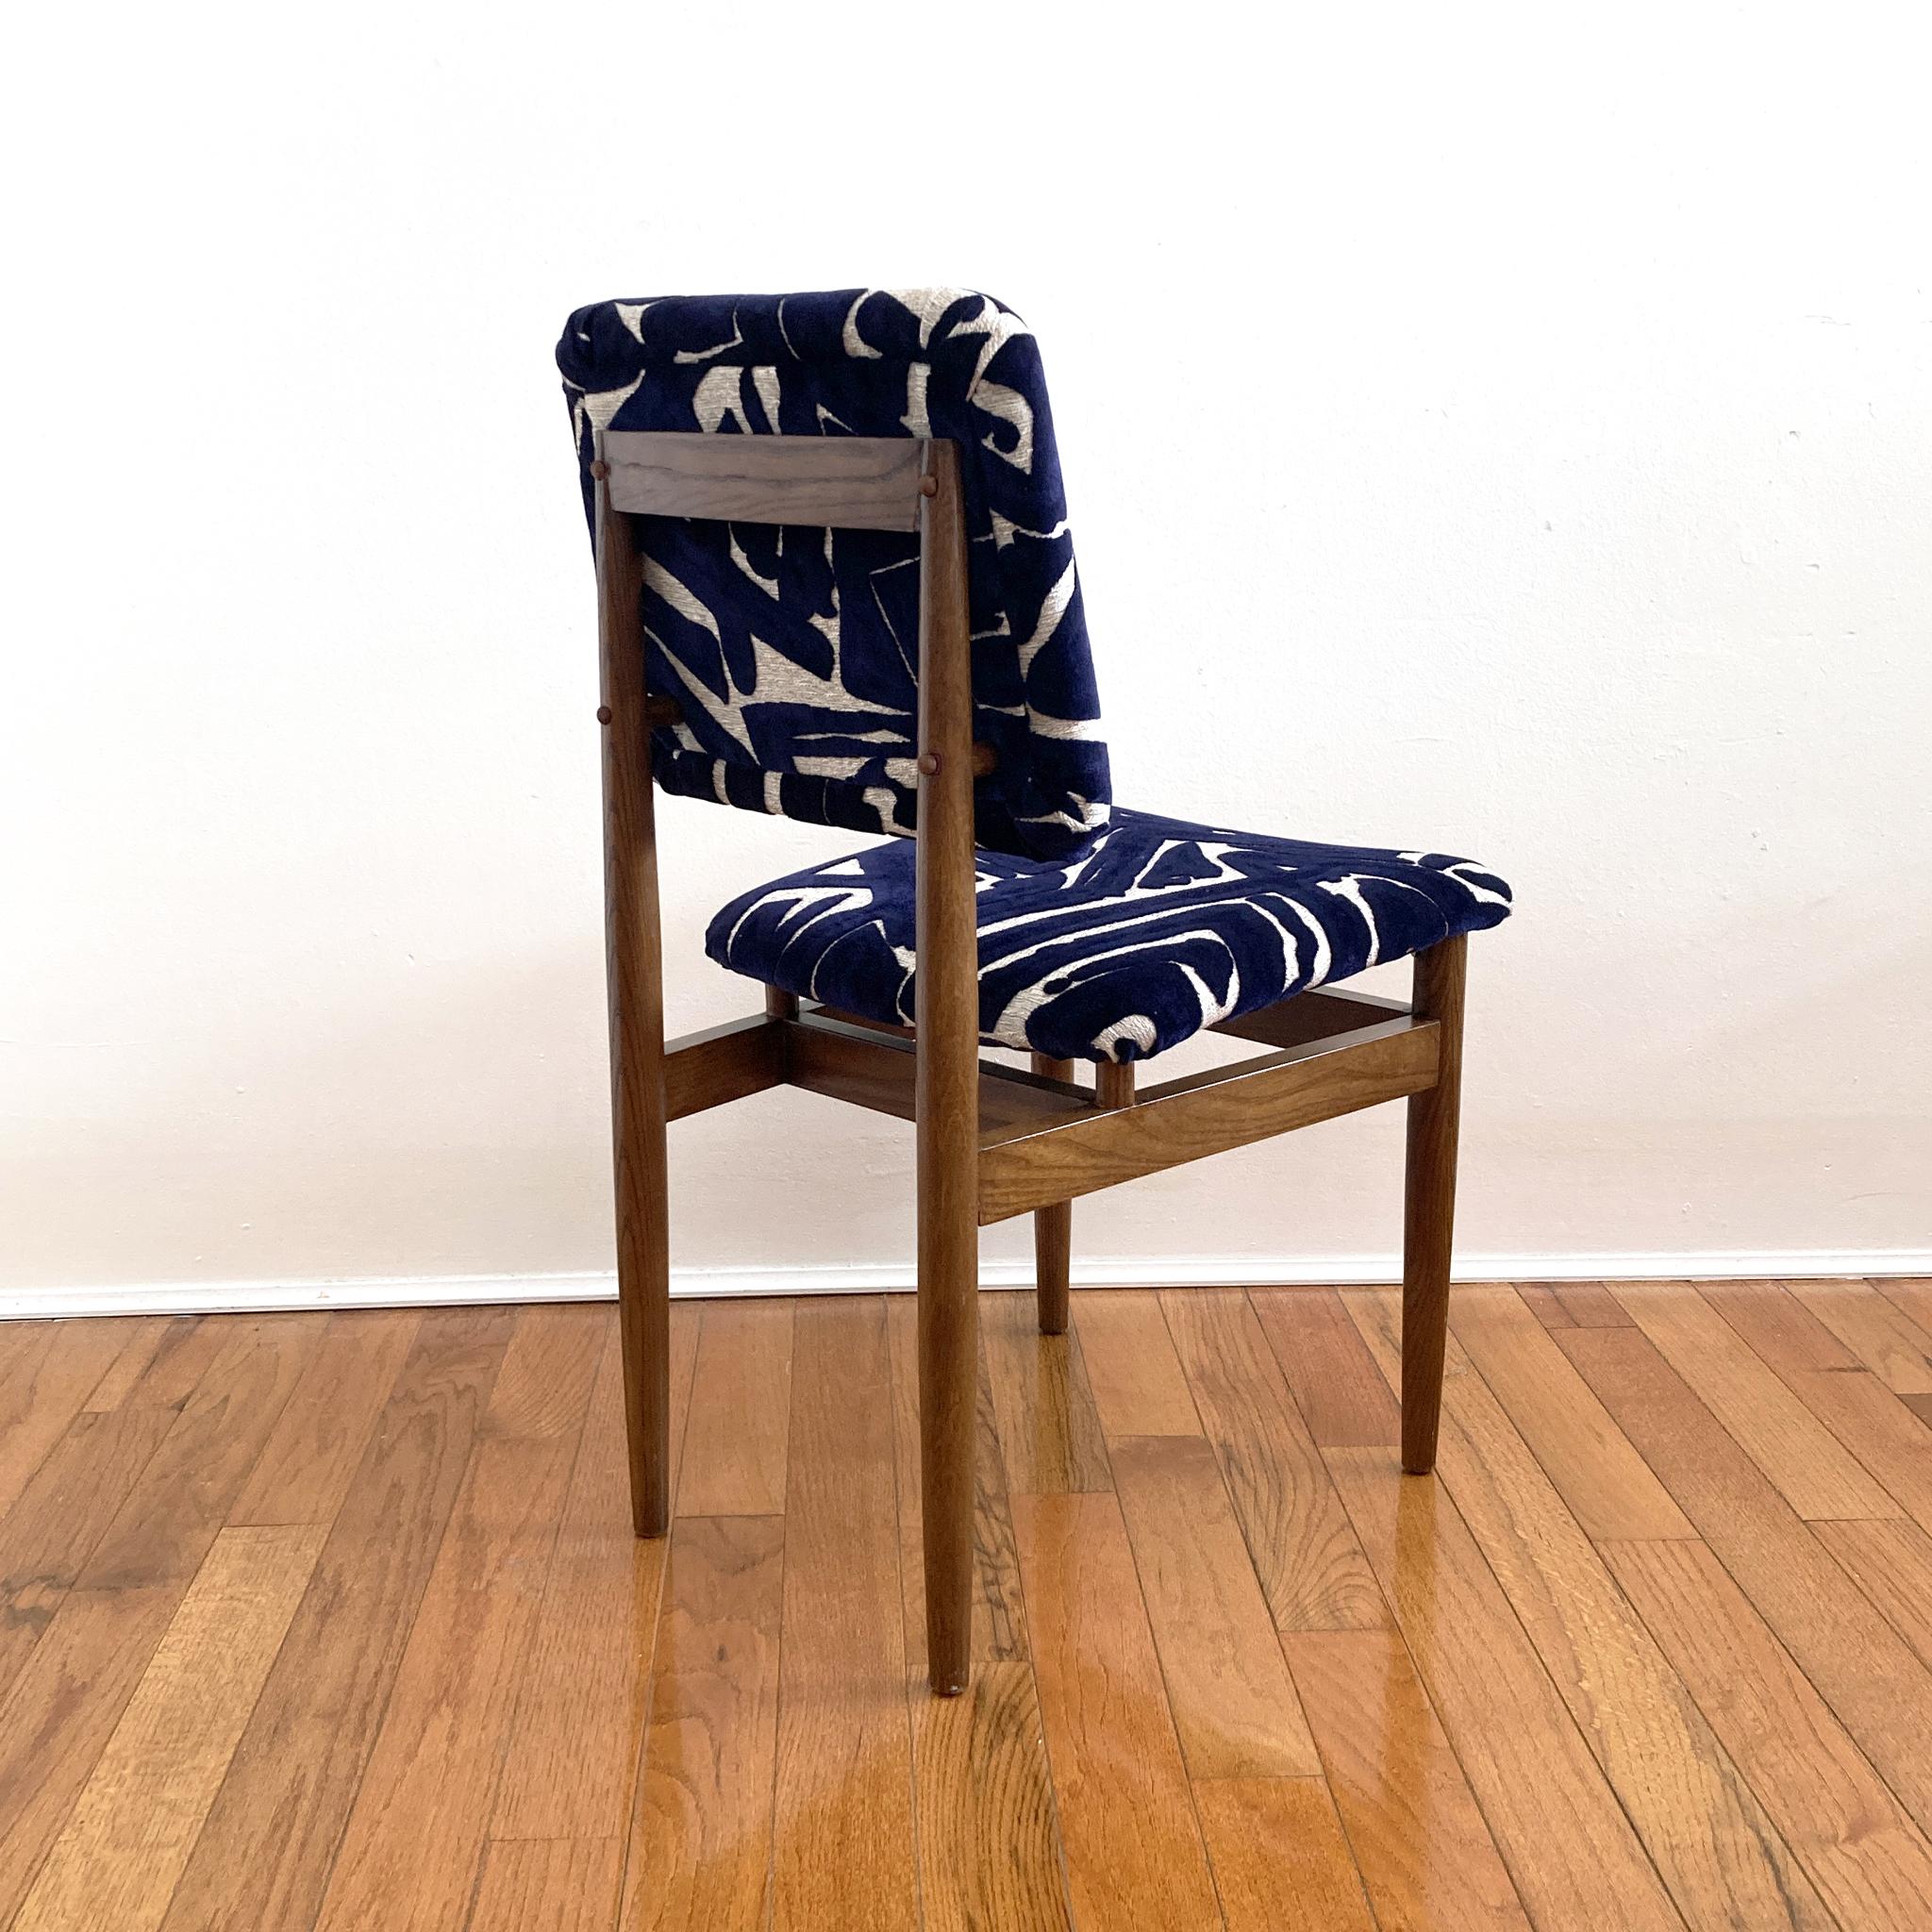 Arne Vodder Style Midcentury Chair Reupholstered in Abstract Blue and Ecru For Sale 1